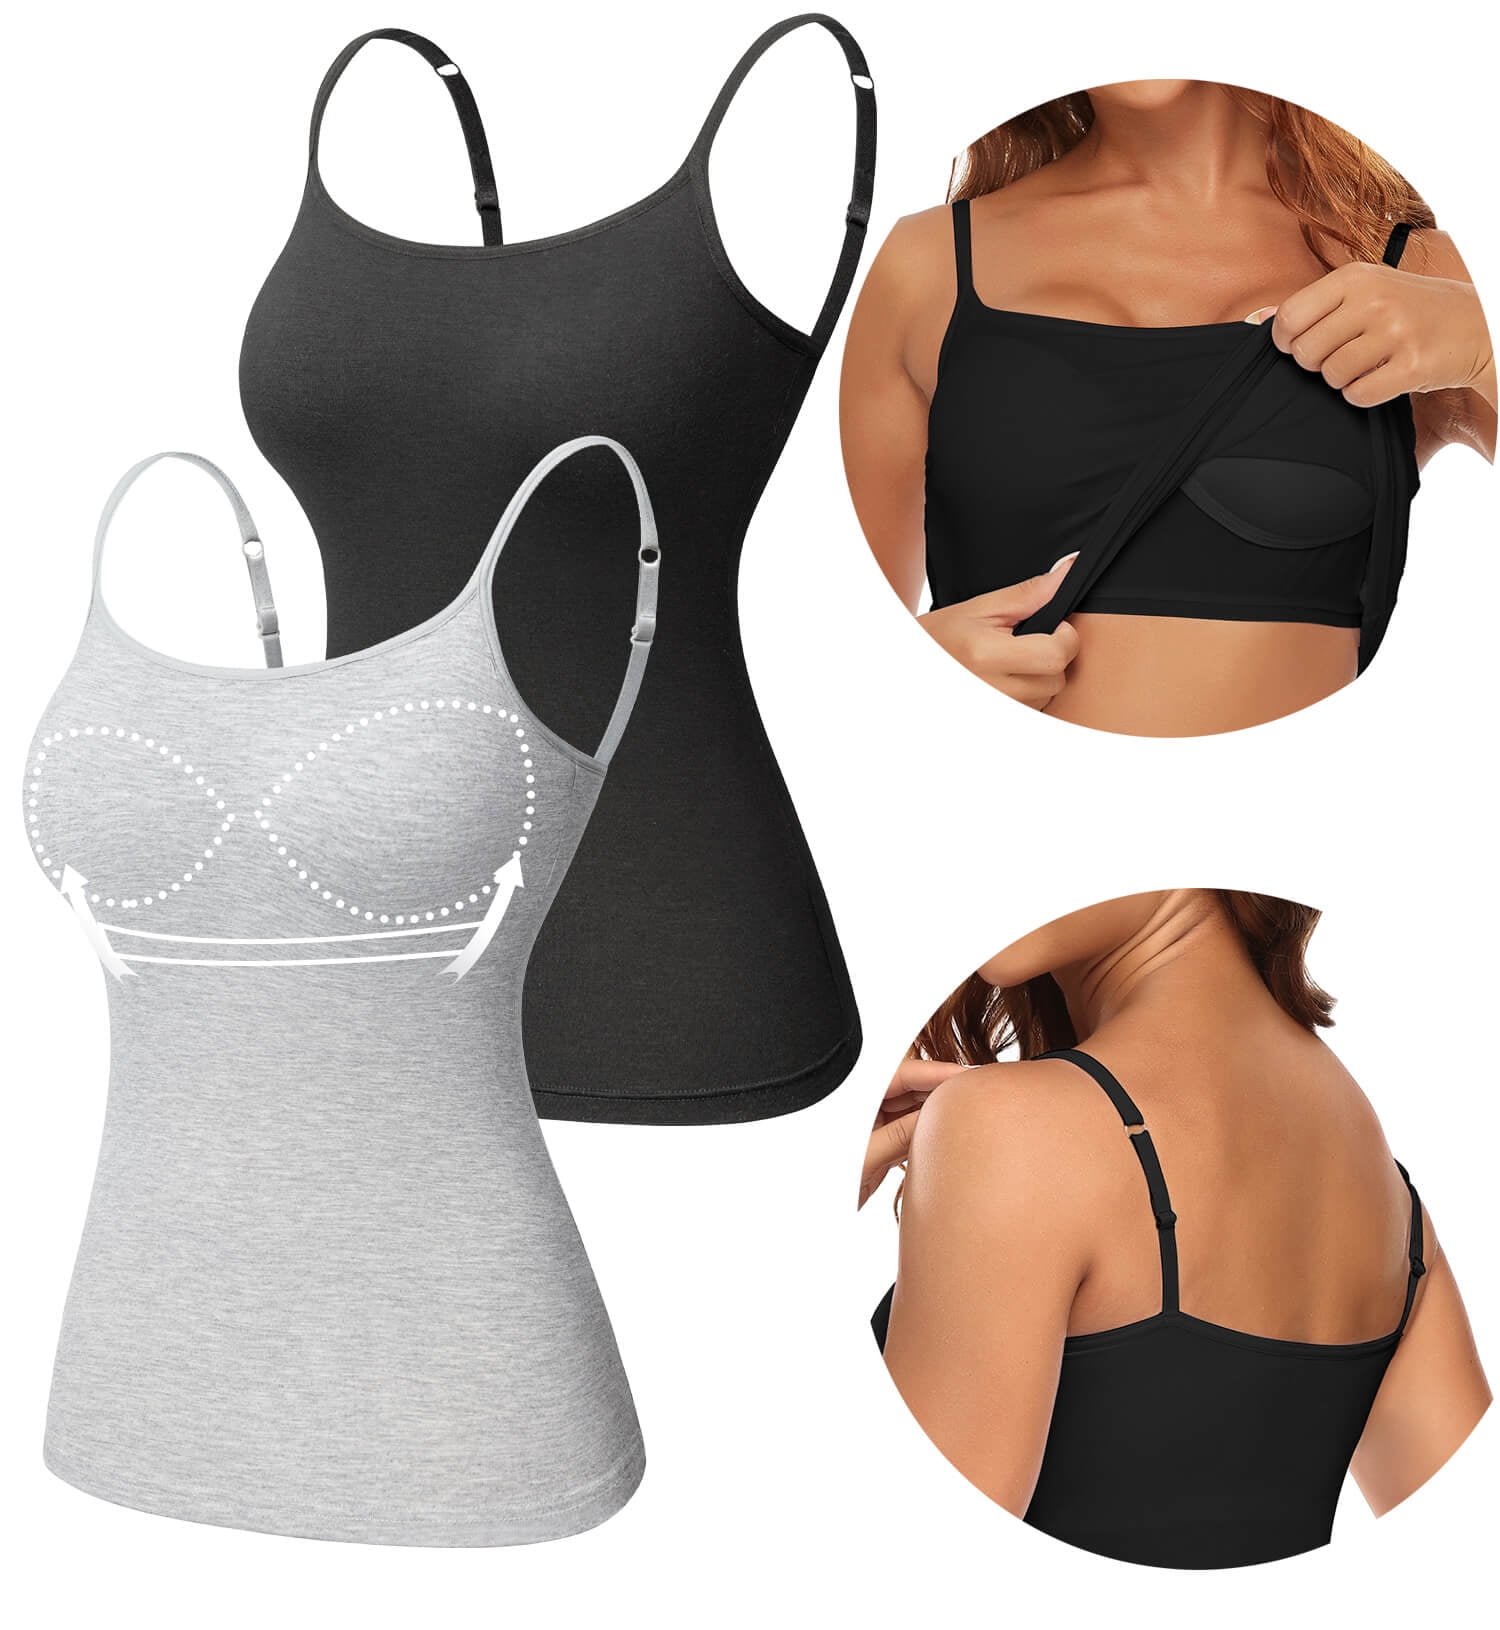 MANIFIQUE 2 Pack Women's Camisole with Built-in Padded Bra